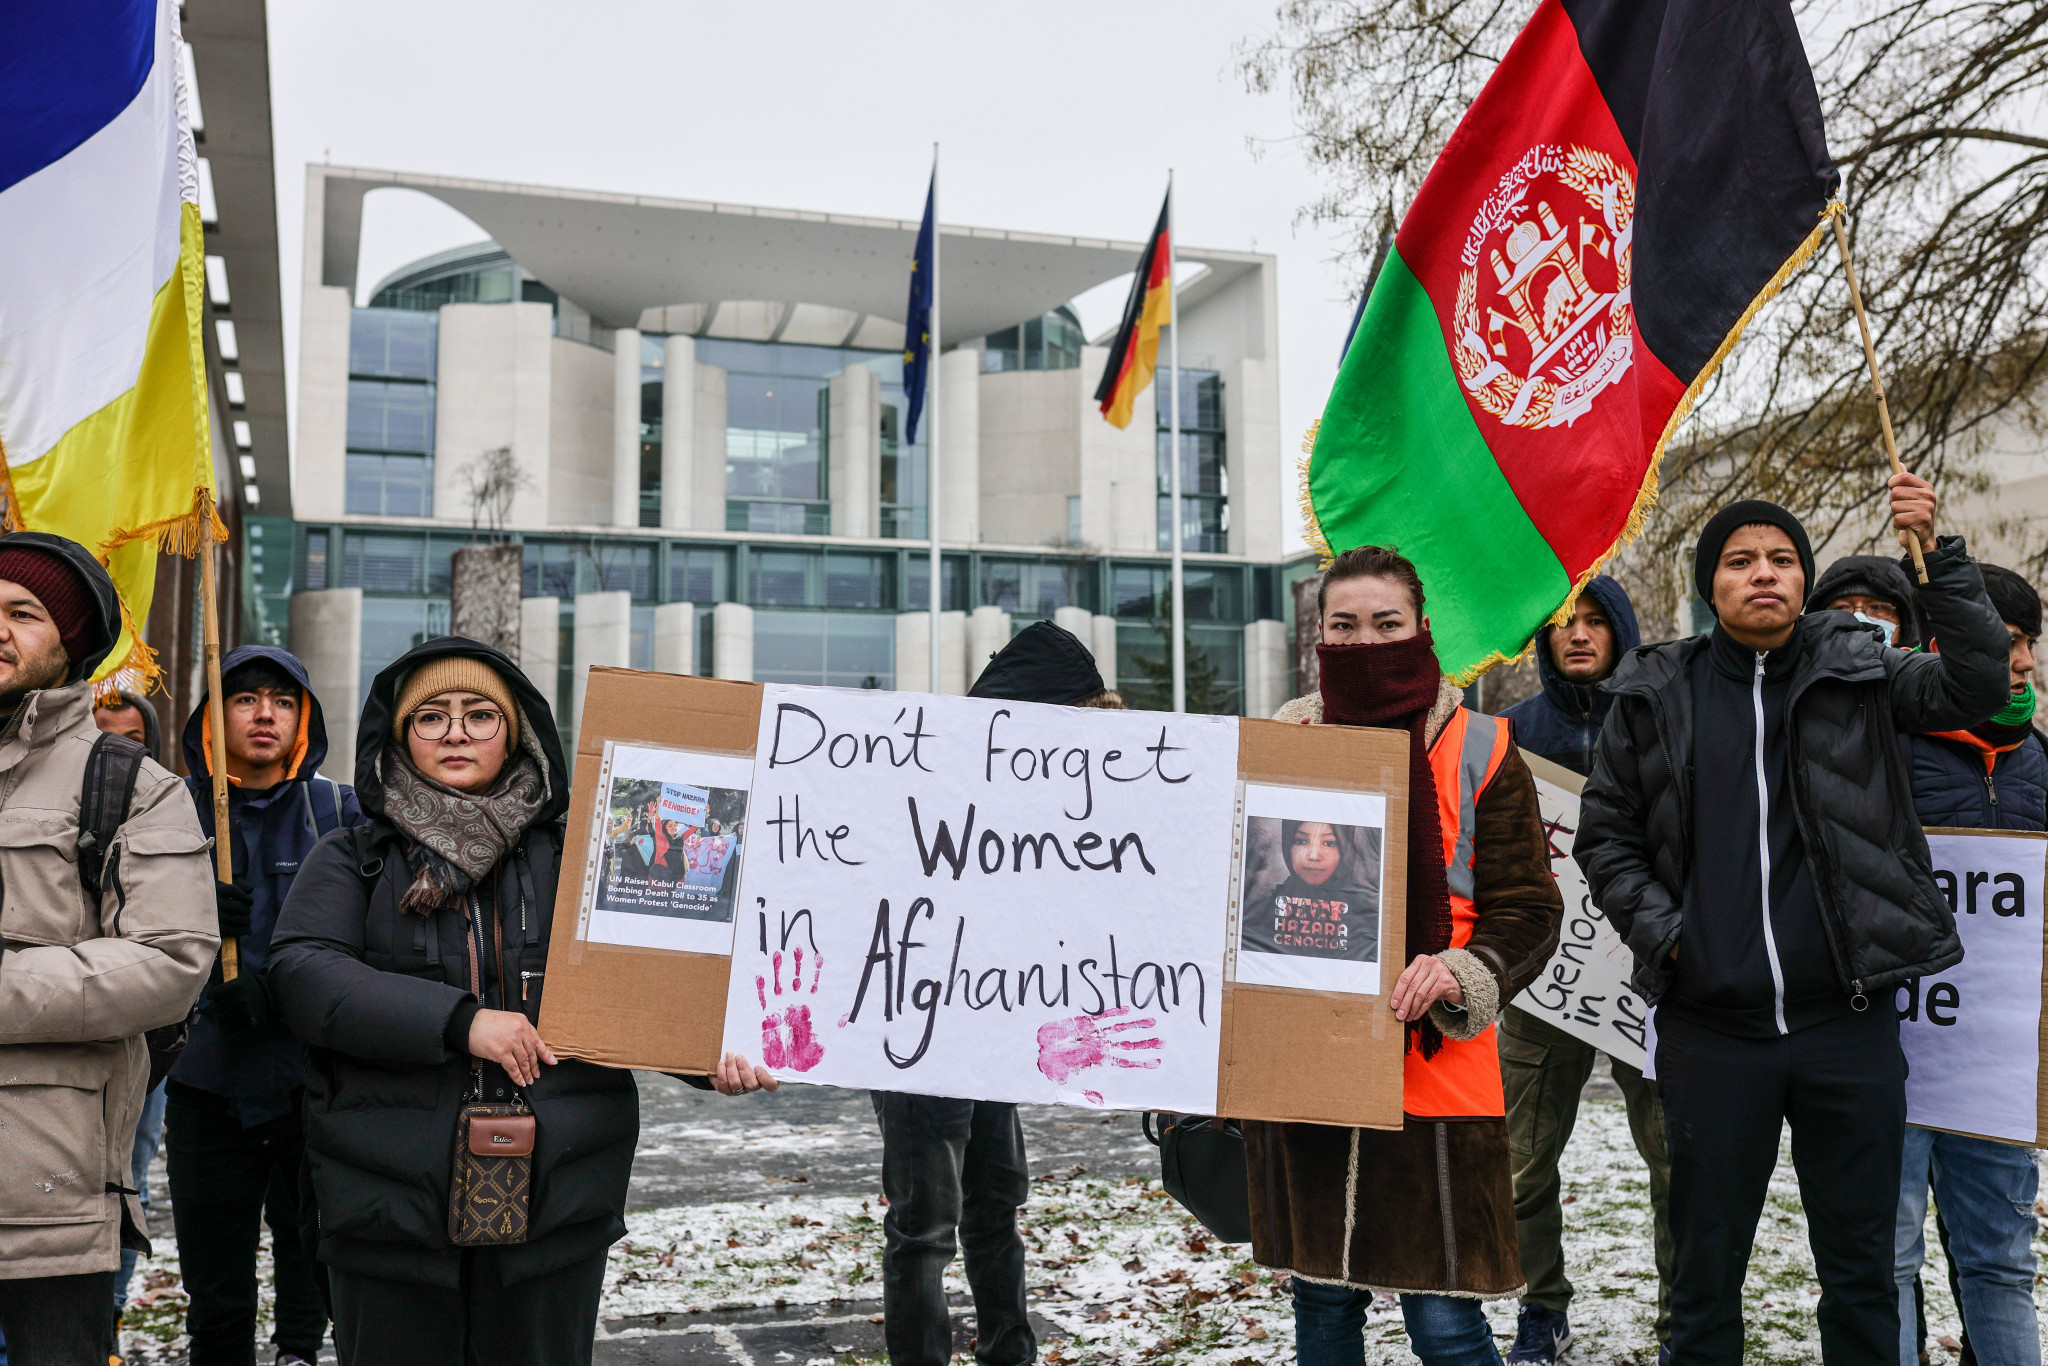 There have been widespread concerns over women's rights in Afghanistan since the Taliban returned to power ©Getty Images